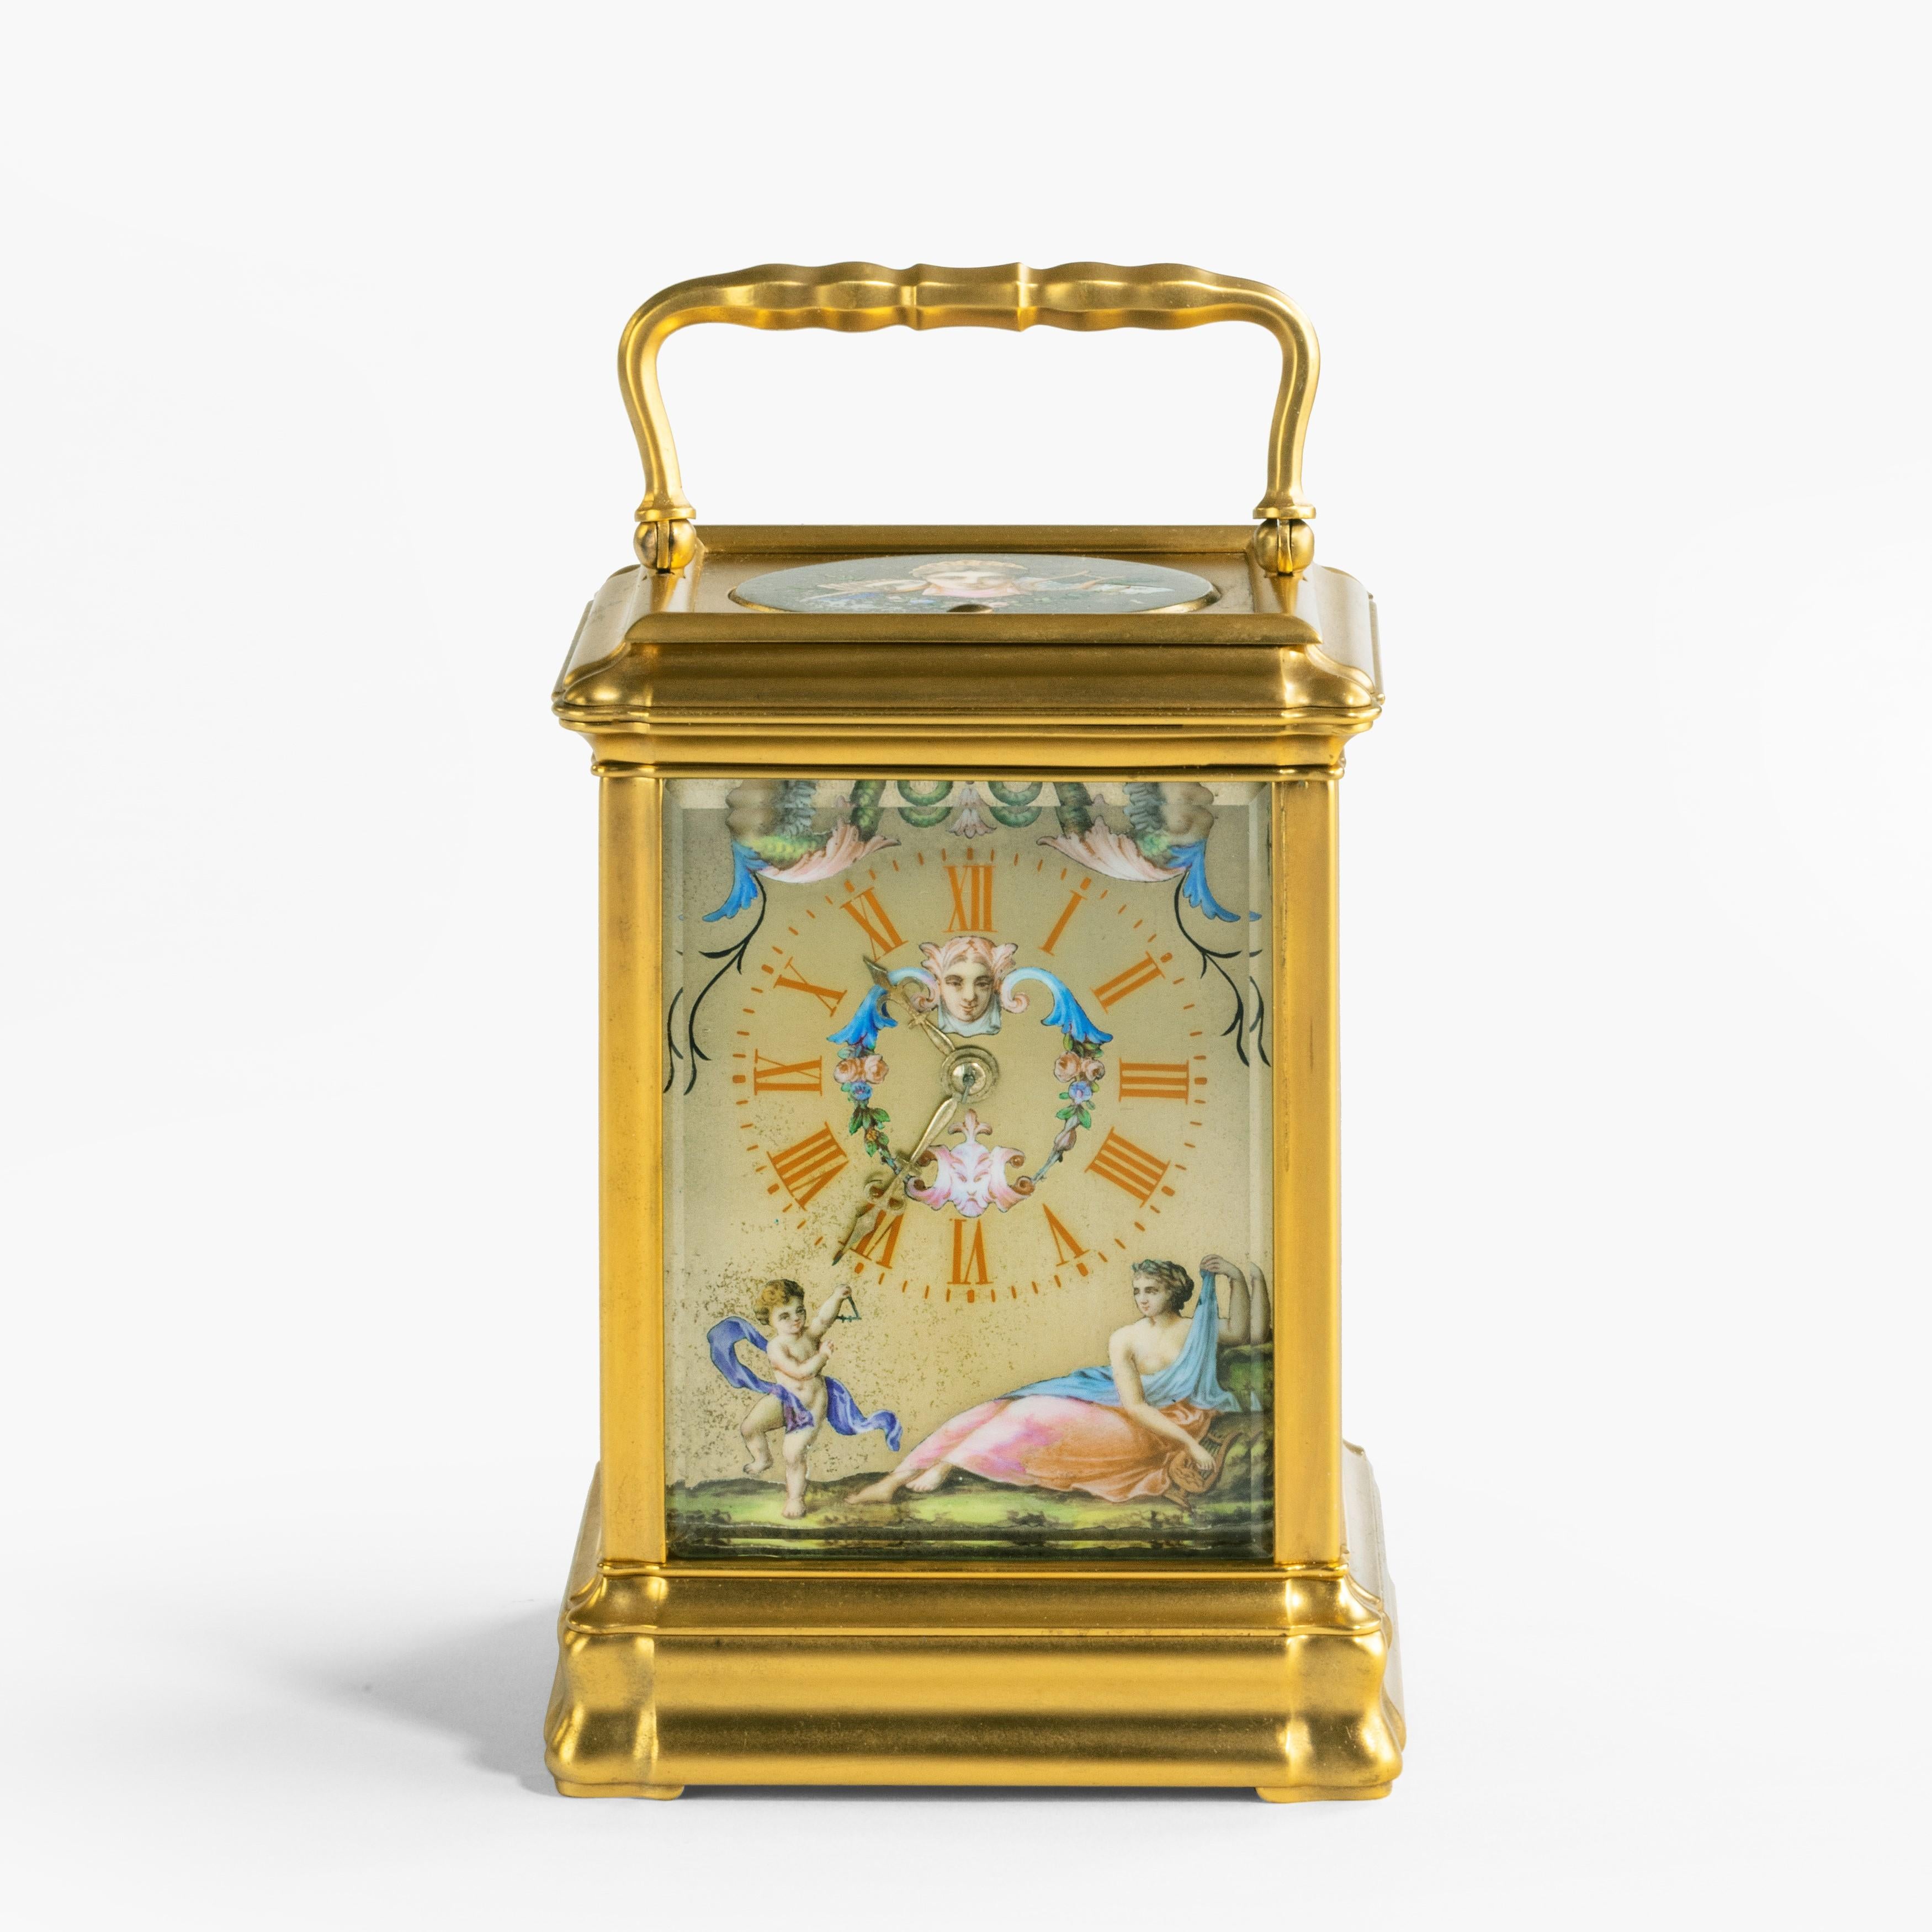 Belle Époque Antique French Hand-Painted Enamel Carriage Clock with Allegorical Themes For Sale